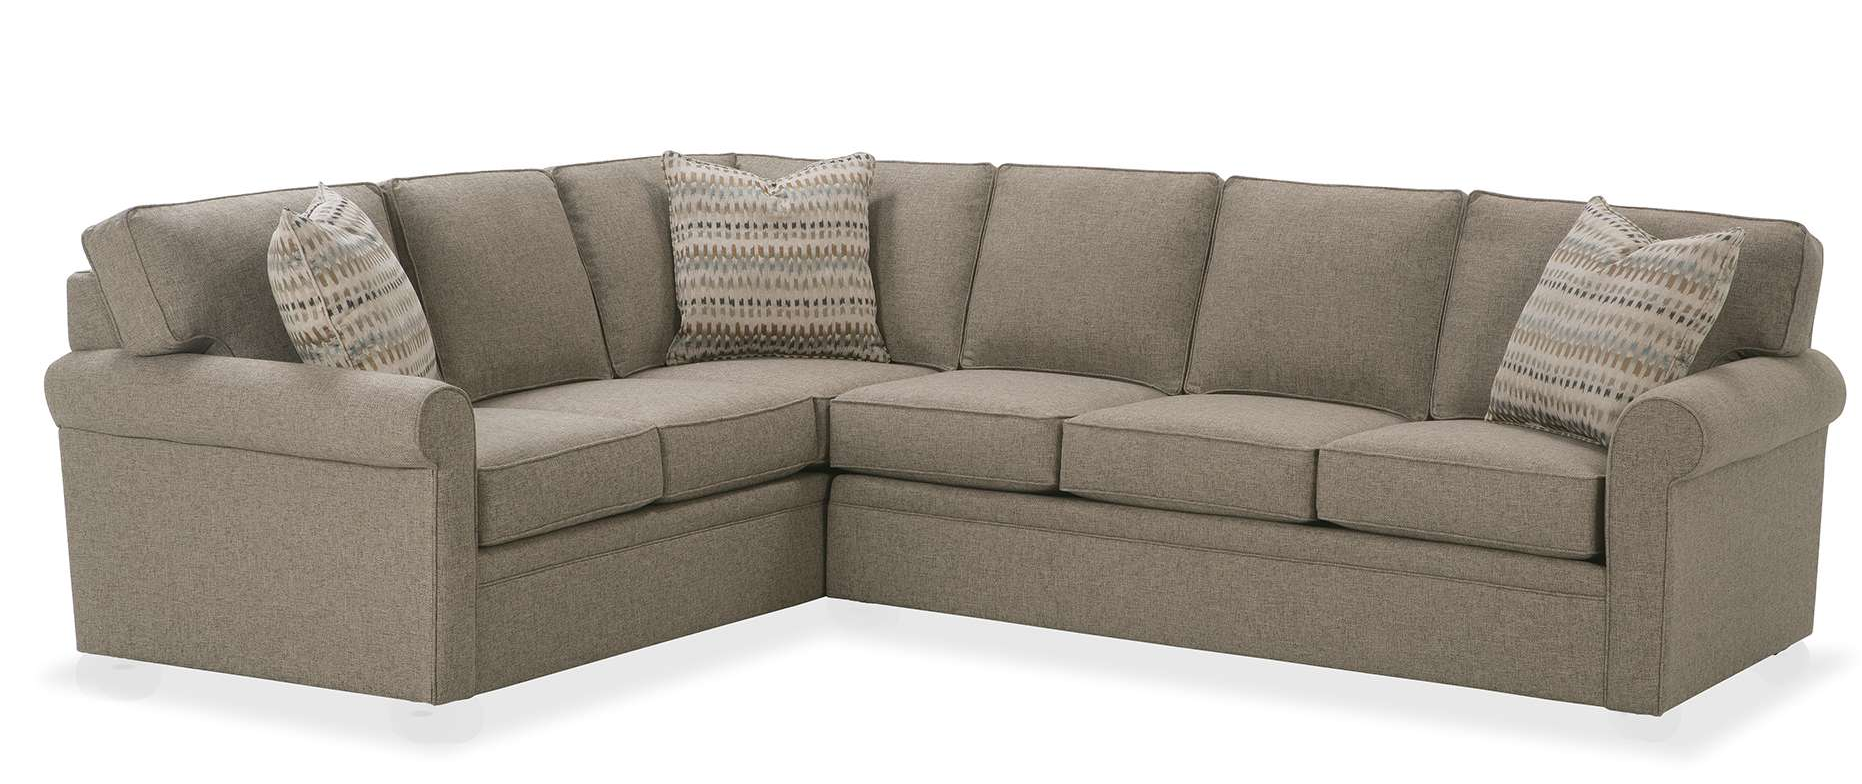 a sectional couch with pillows on it is on a white background .